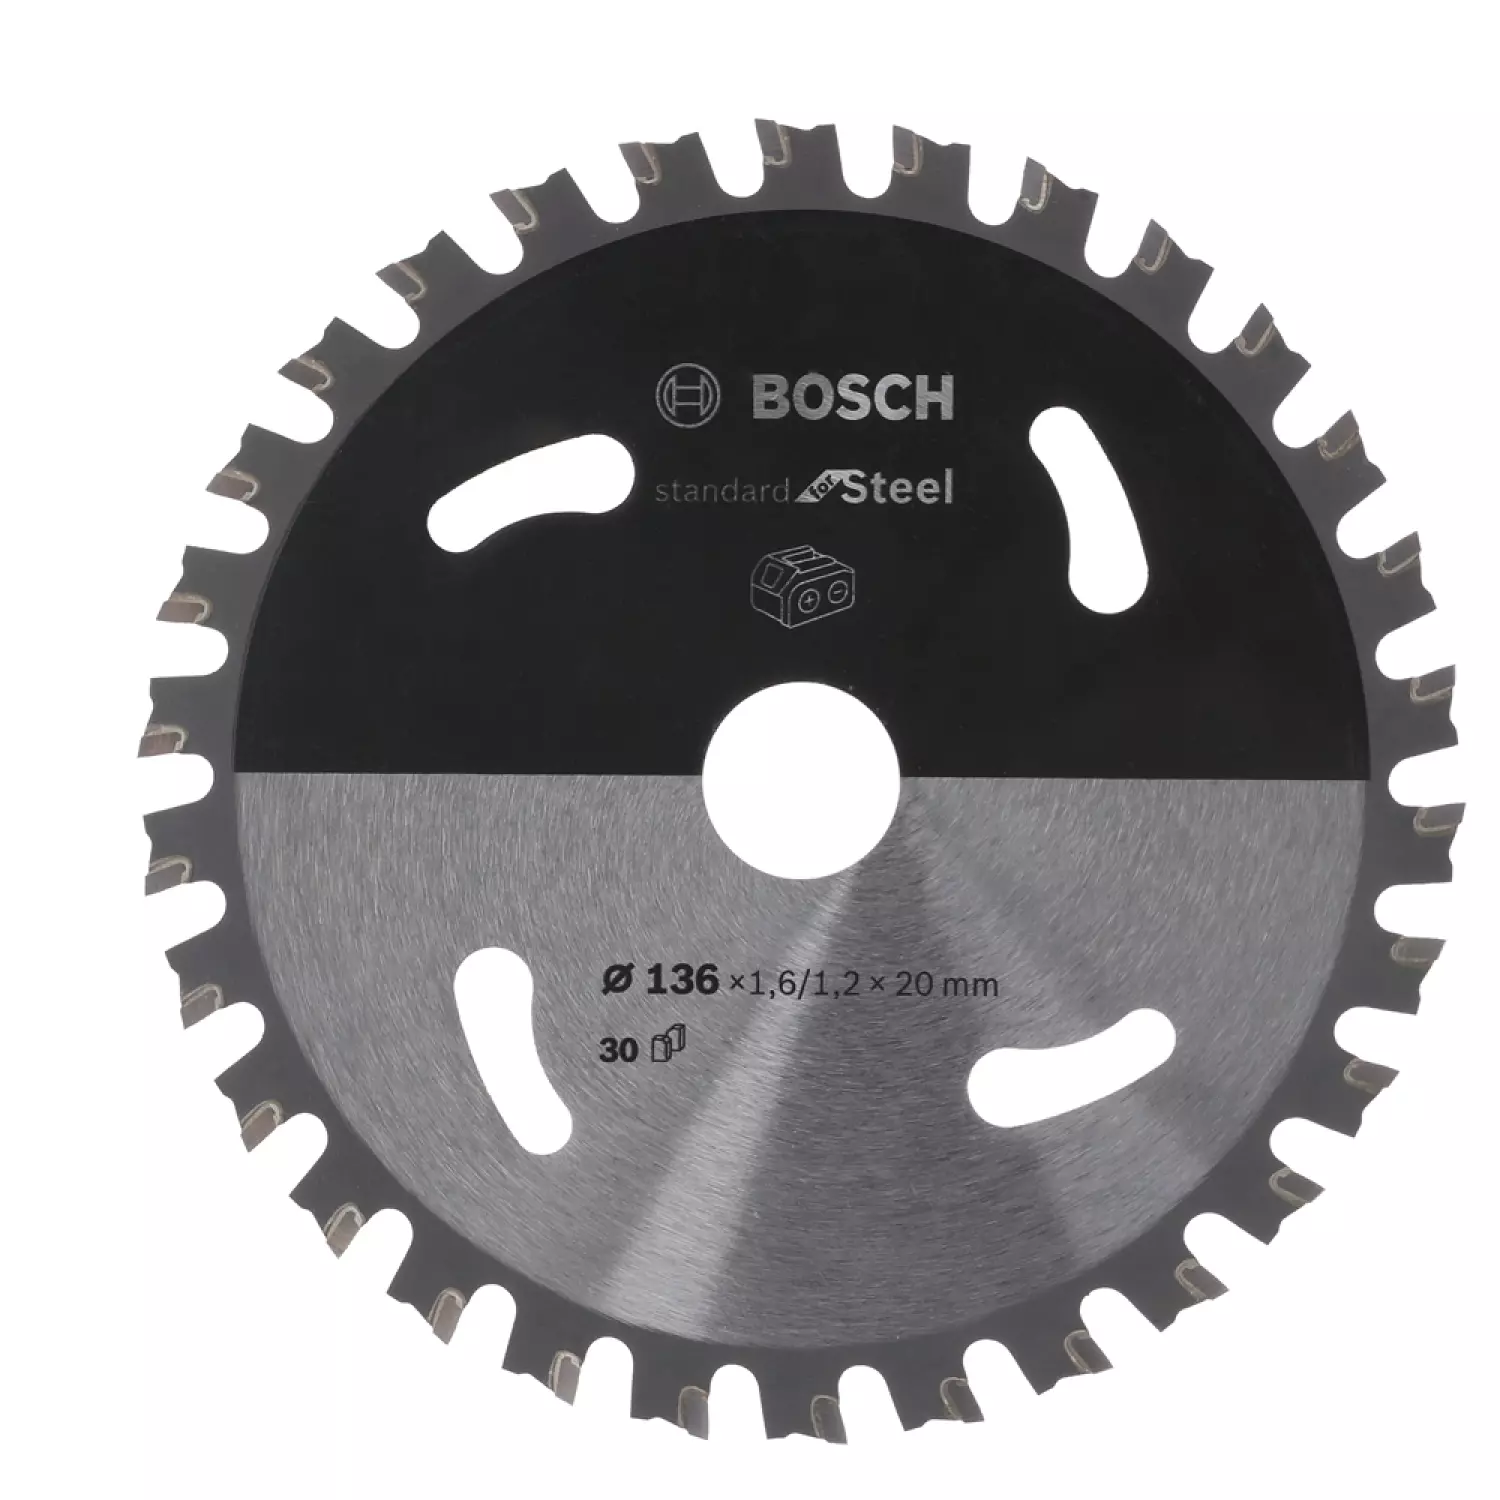 Bosch 2608837747 - Lame pour scie circulaire ACCU Standard for Steel 140x20x1.6/1.2x30T-image